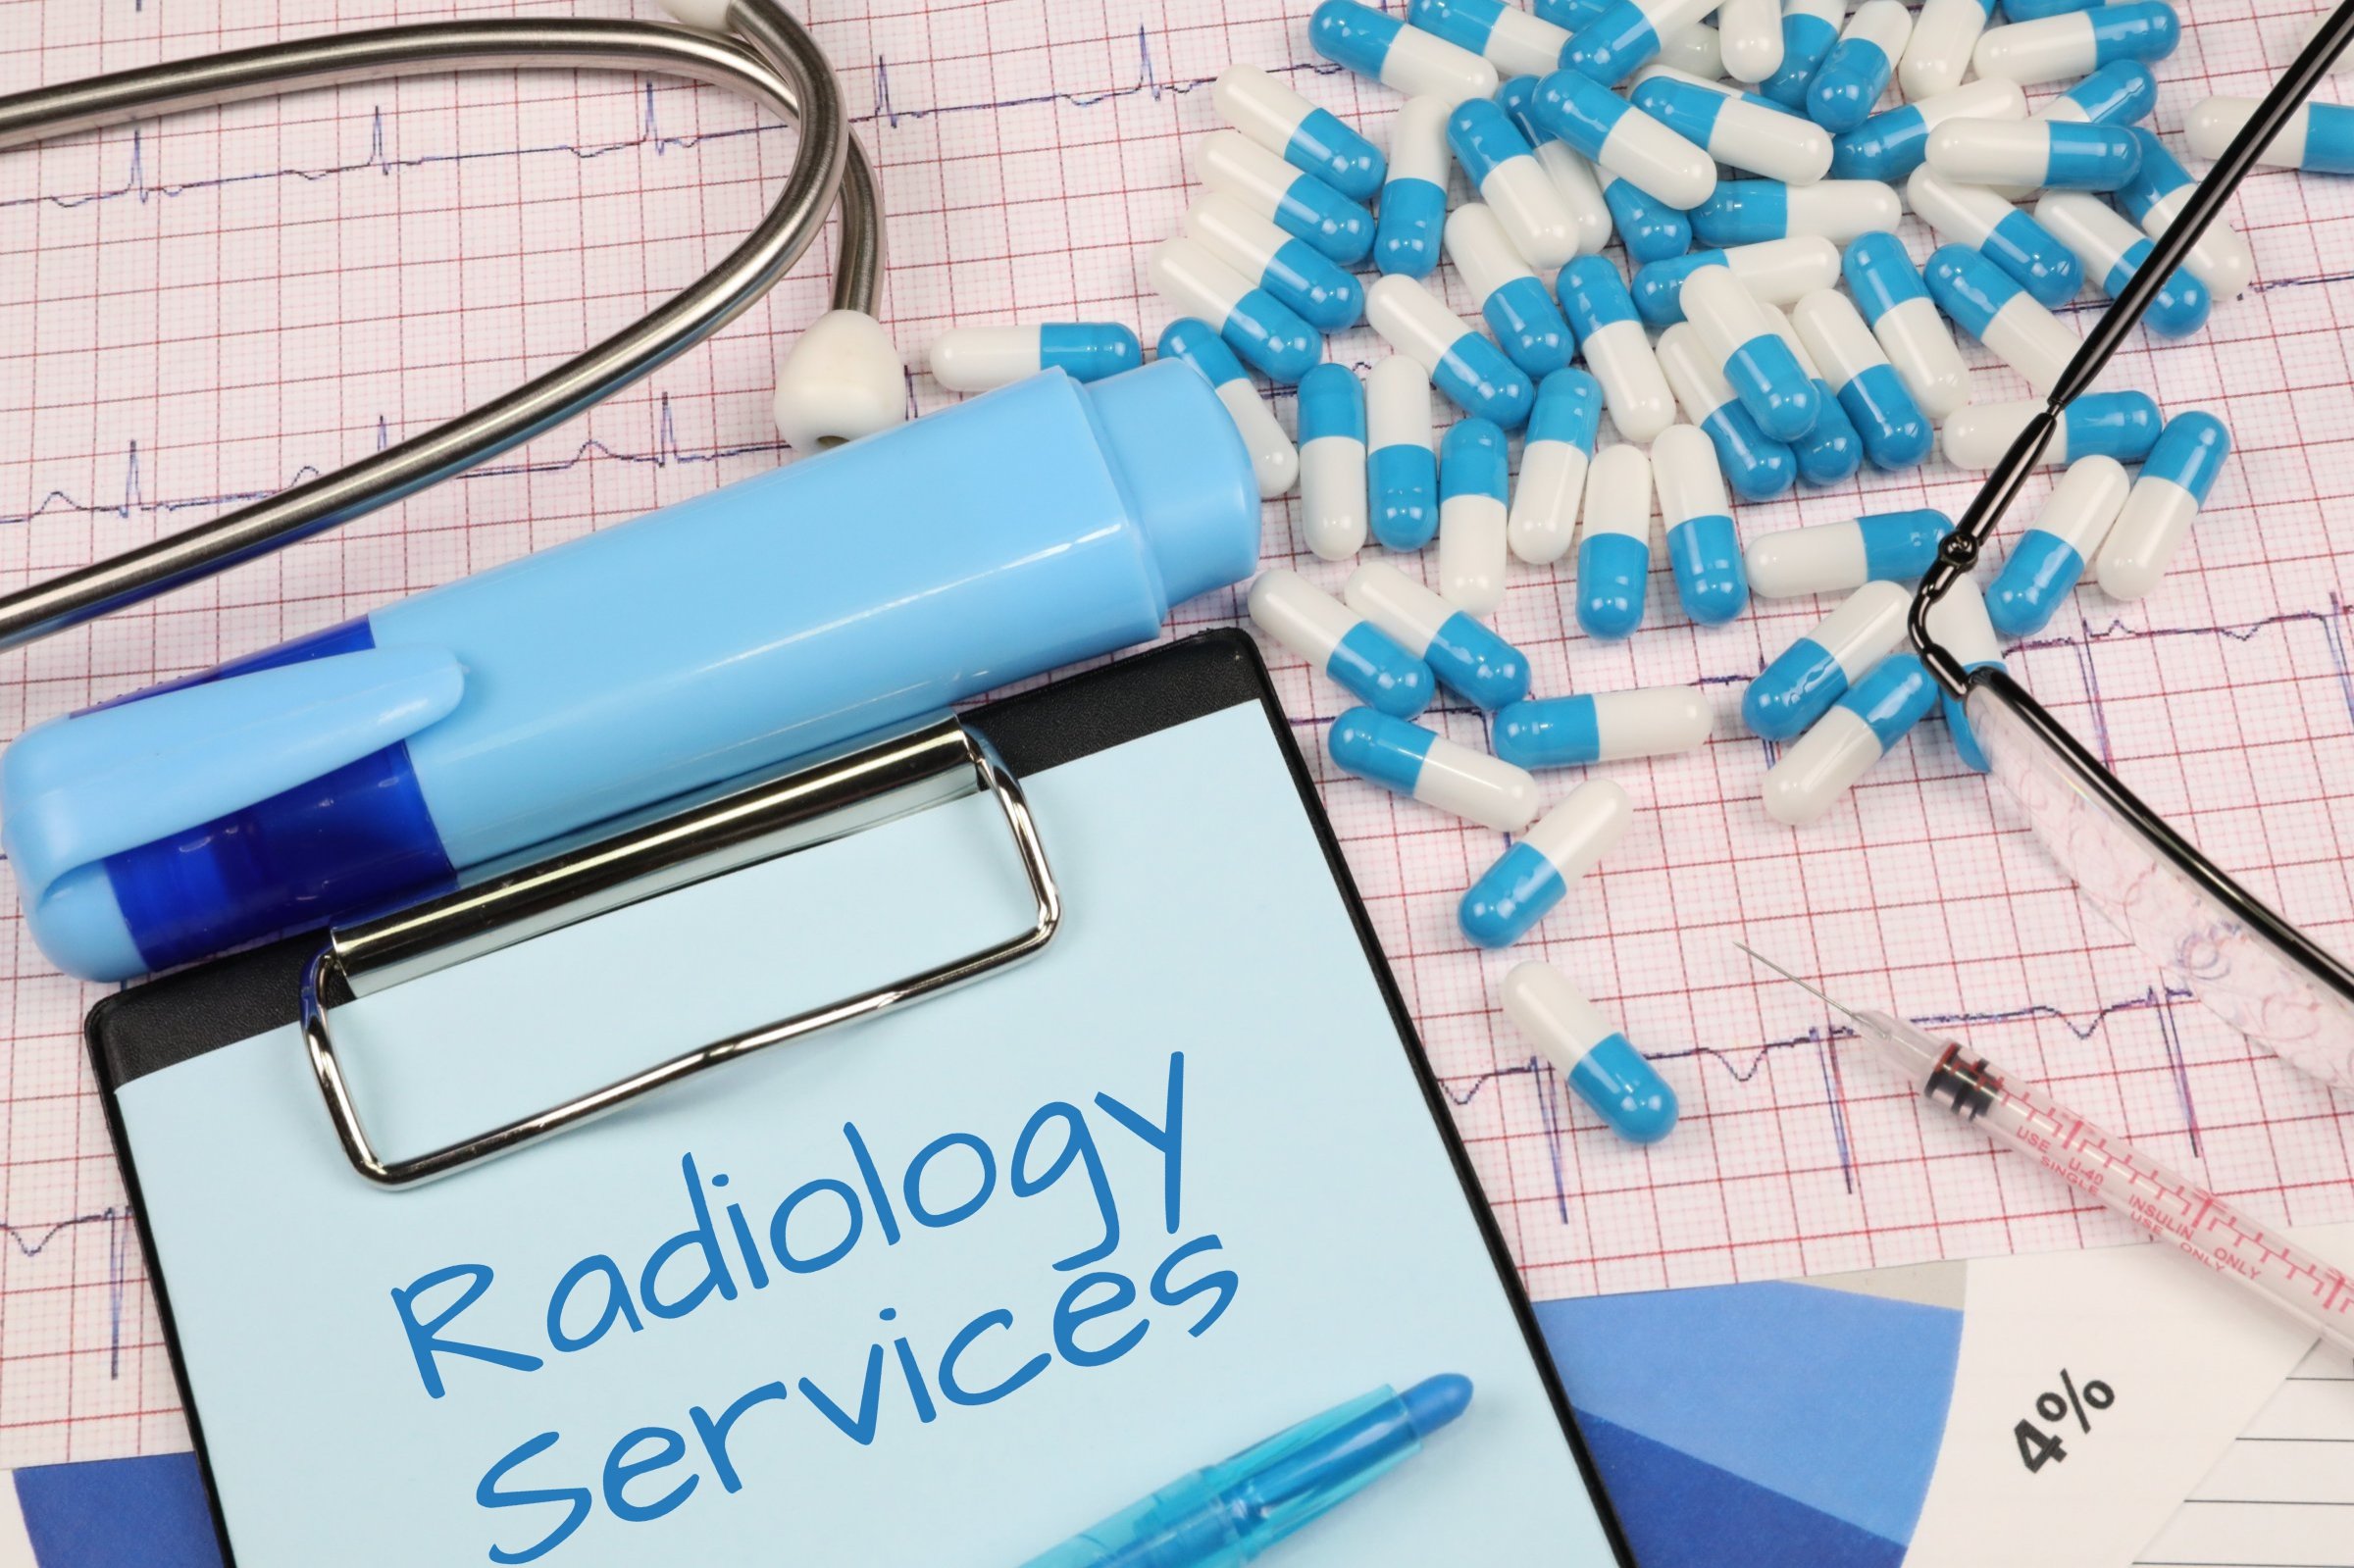 radiology services